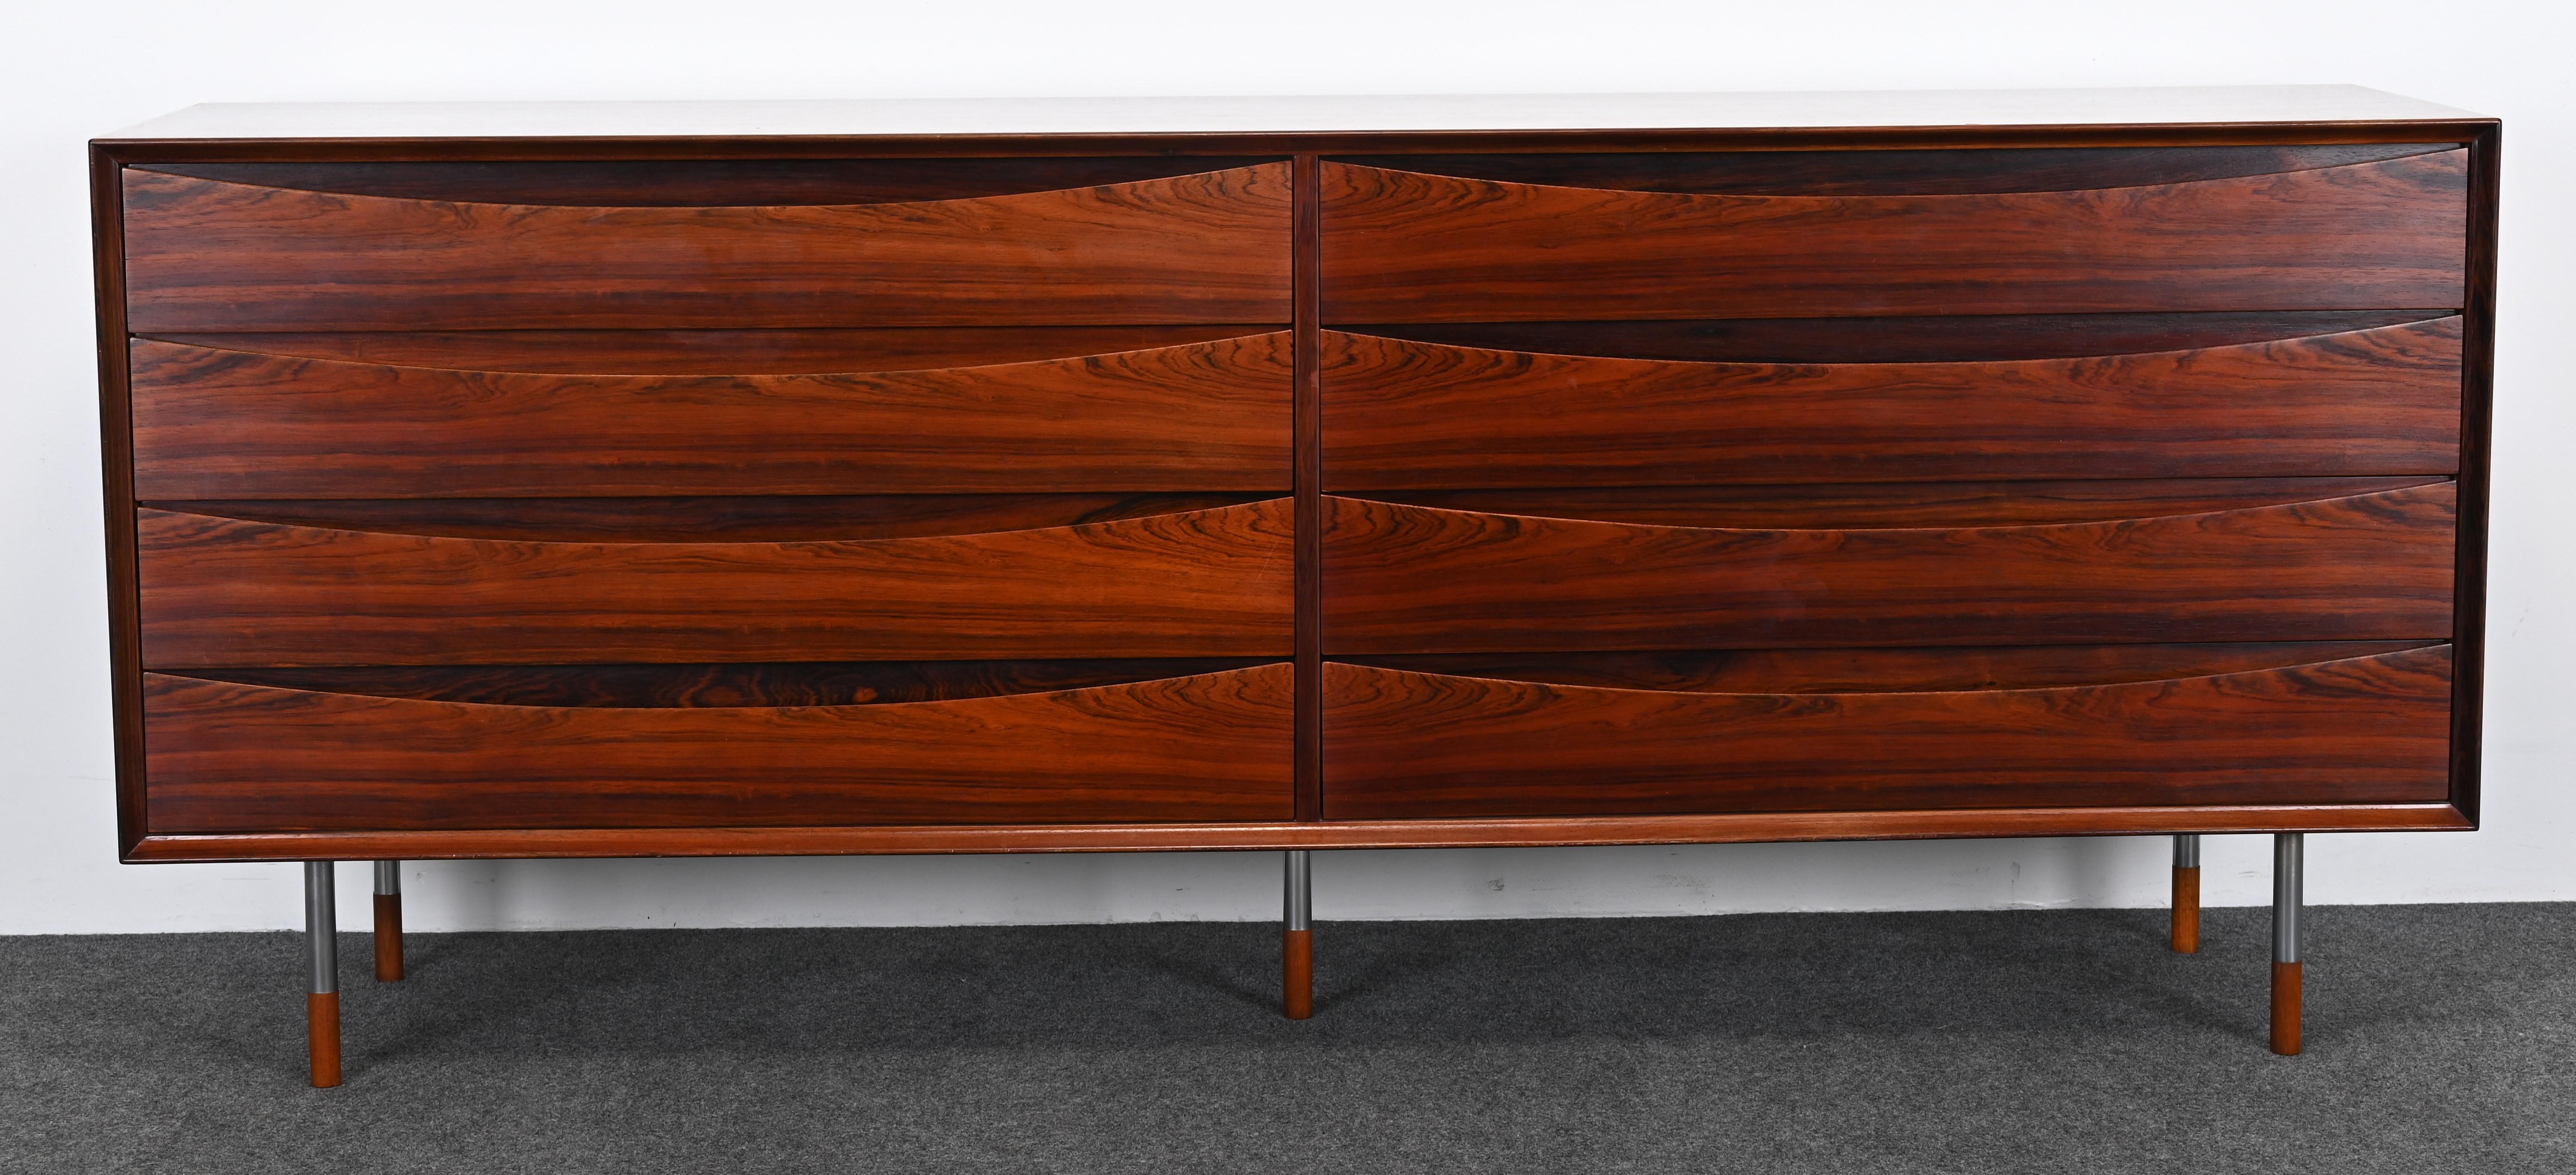 A gorgeous rosewood Dresser by Arne Vodder for Sibast, 1960s. This Scandinavian Modern cabinet seems to be rare as it has metal legs instead of wood and there are not many on the marketplace. The Danish rosewood chest would look great in any